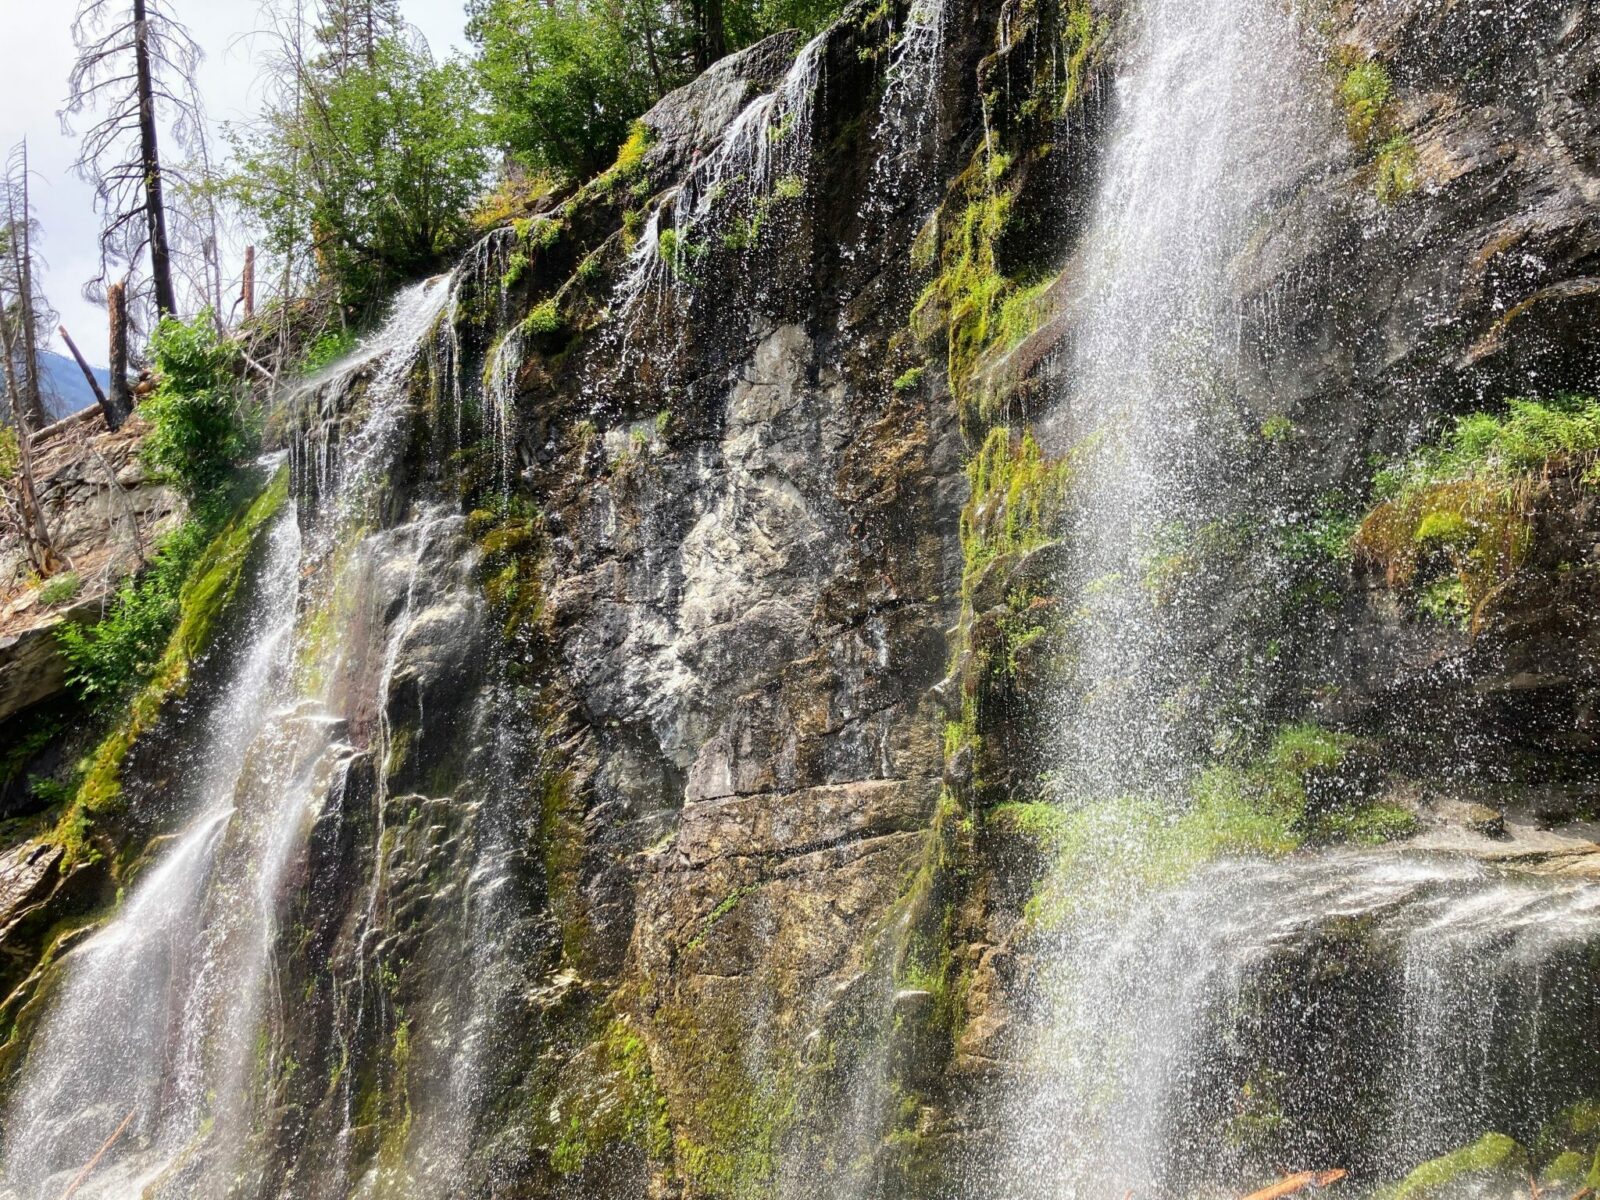 Multiple cascades of Silver Falls tumble down a vertical cliff with occasional moss